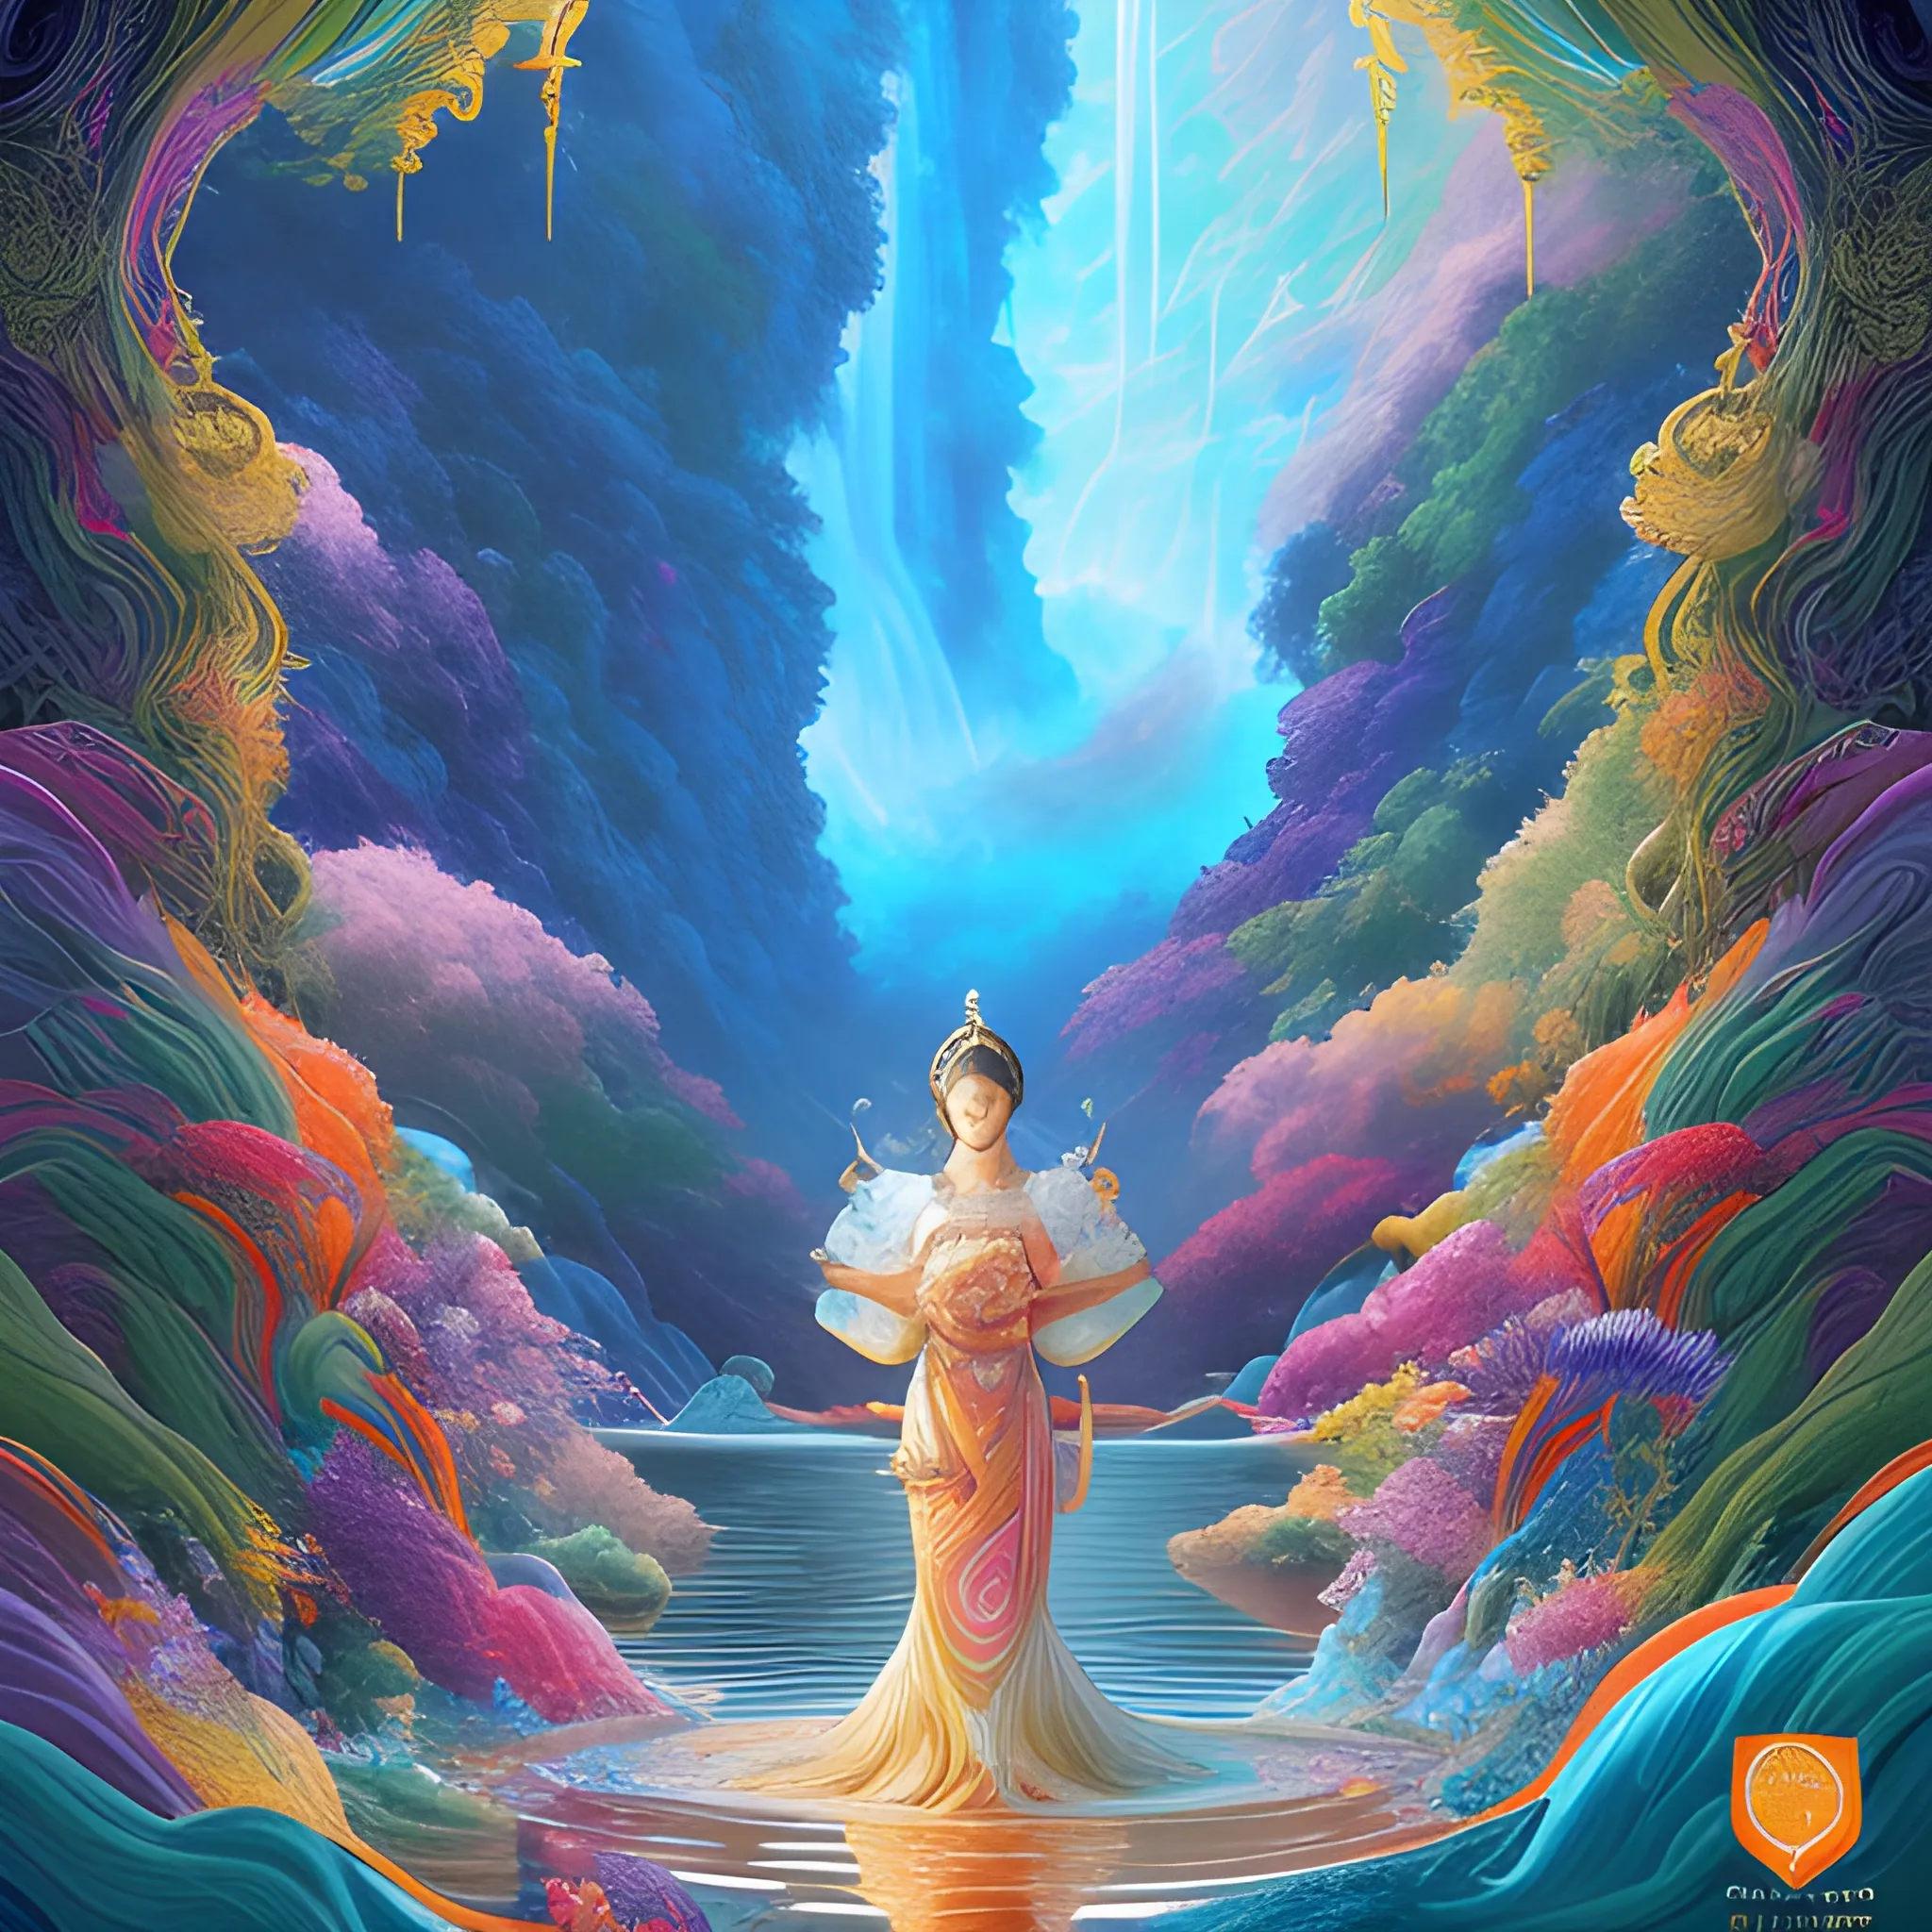 (by Ananta Mandal (and Andrew Biraj:0.5)), (in the style of nihonga), Style: Abstract, Medium: Digital illustration, Subject: A Goddess of Mercy in the middle of picture, An otherworldly landscape with floating islands, cascading waterfalls, and vibrant flora and fauna. Camera Angle: Overhead shot capturing the vastness and intricate details of the scene. The colors are saturated, and the lighting creates a warm and ethereal atmosphere. The painting is highly detailed, with every brushstroke capturing the complexity of the imaginary world., (high quality), (detailed), (masterpiece), (best quality), (highres), (extremely detailed), (8k), seed:792315689